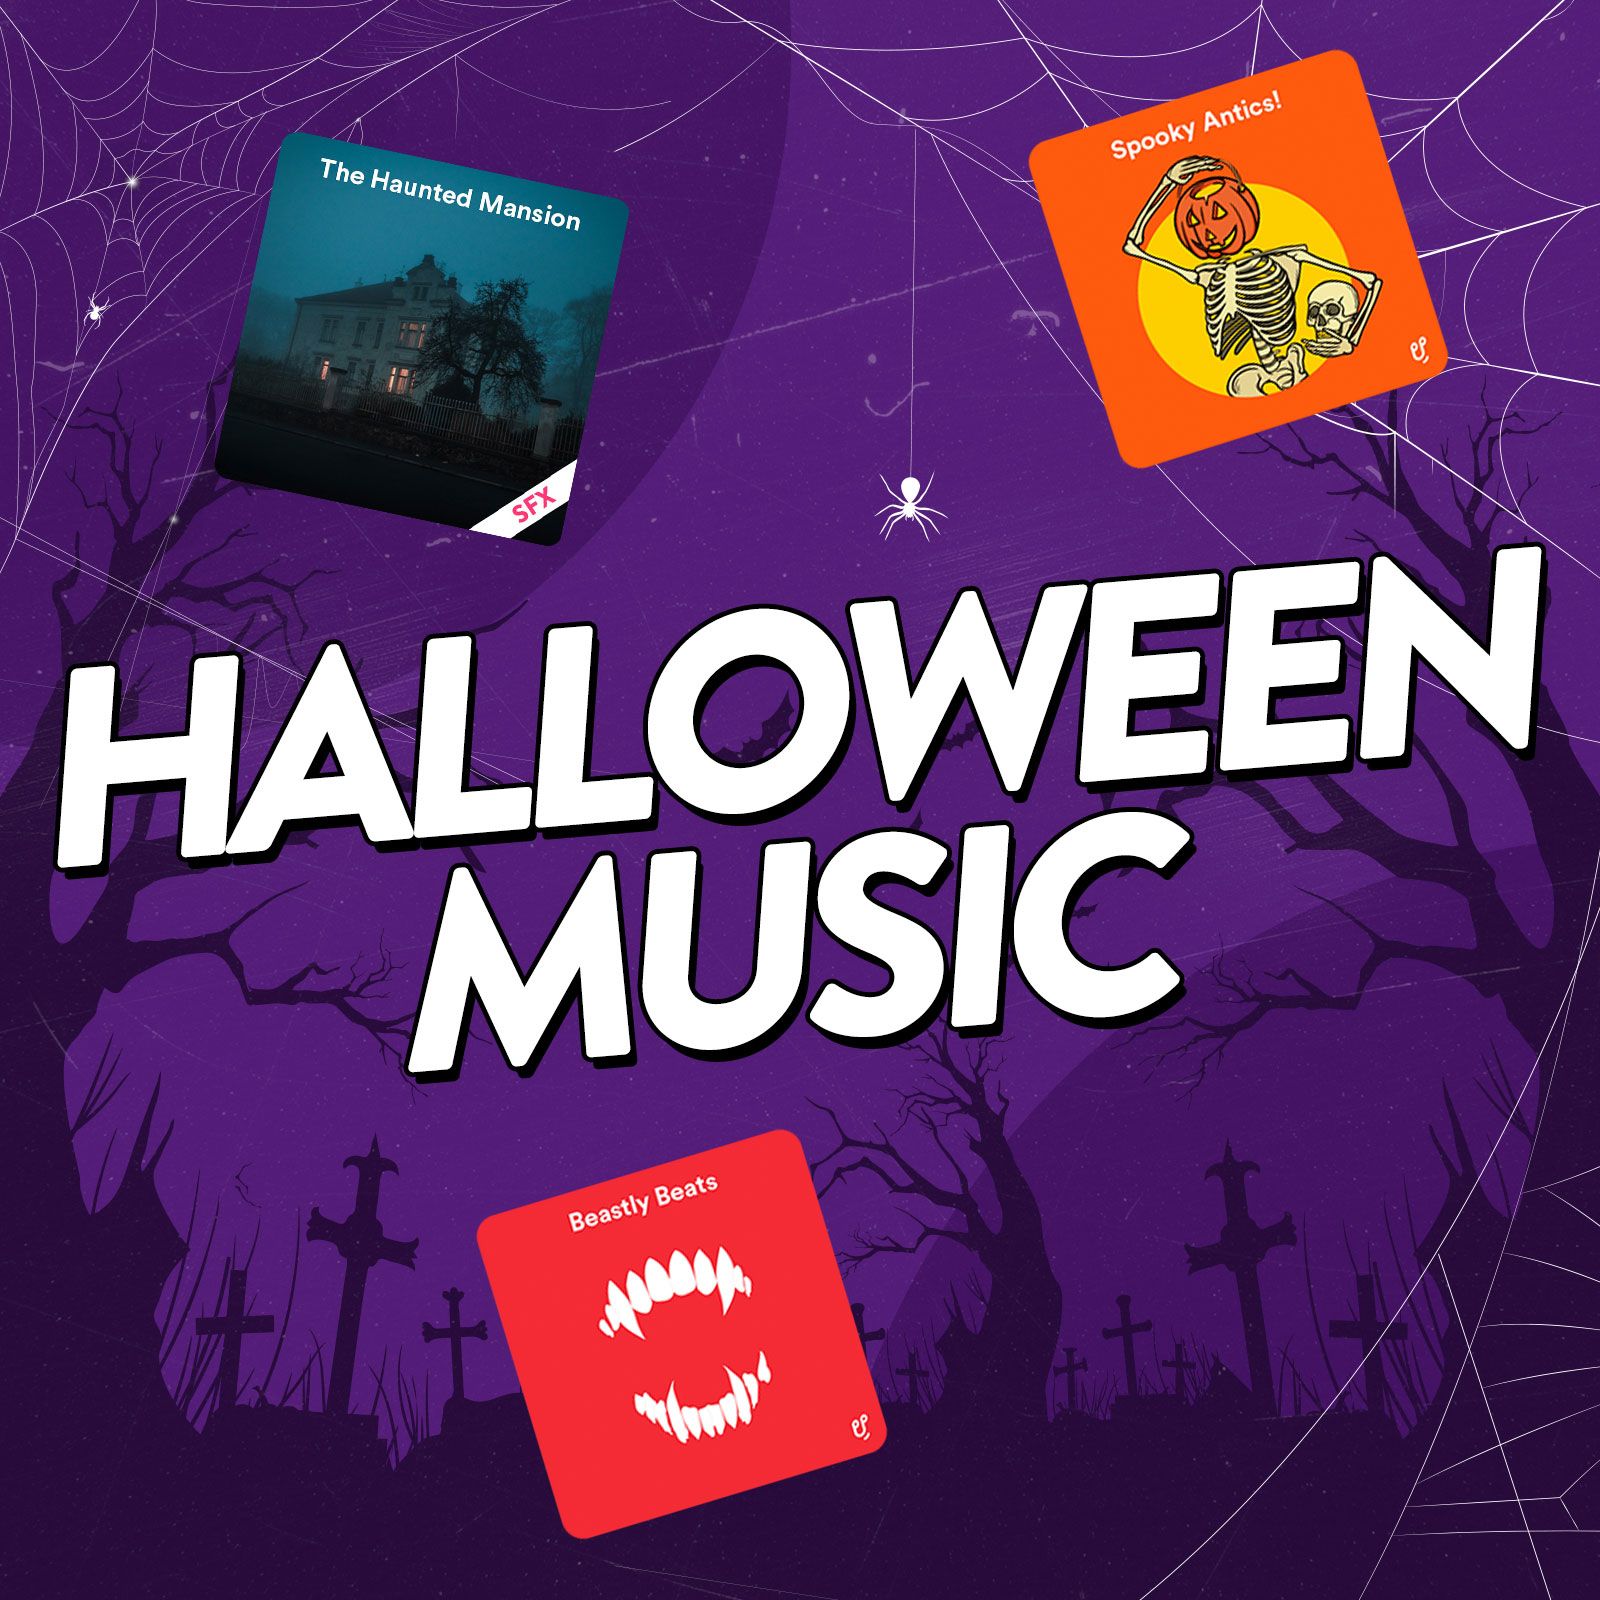 Image to accompany article outlining the best royalty-free Halloween music for creators.